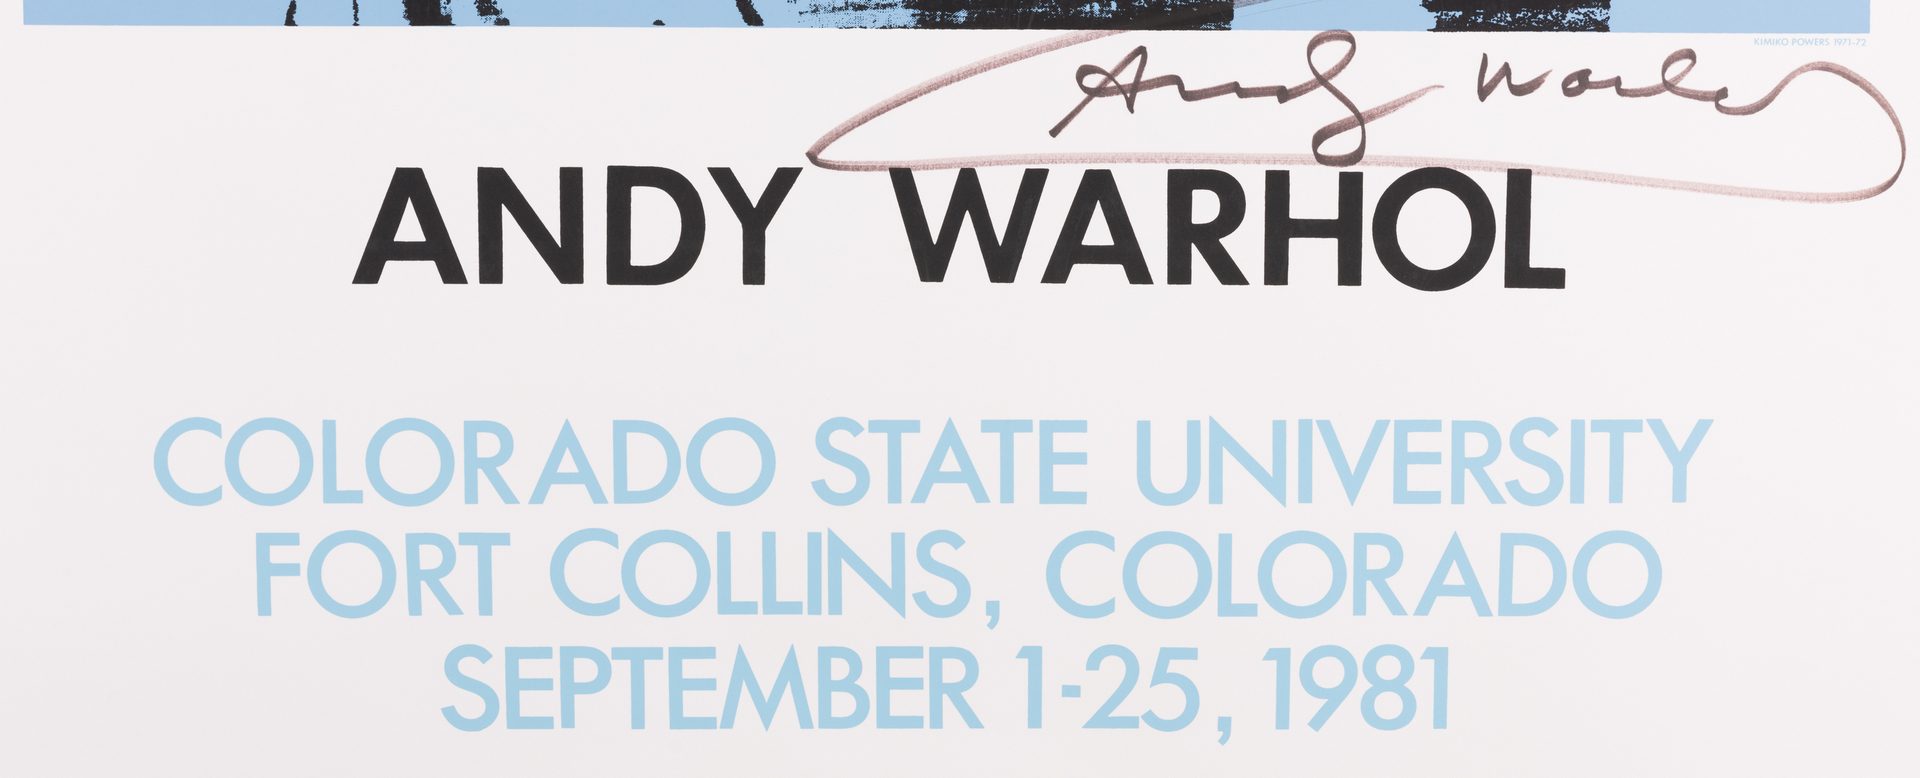 Lot 460: Andy Warhol Signed Poster